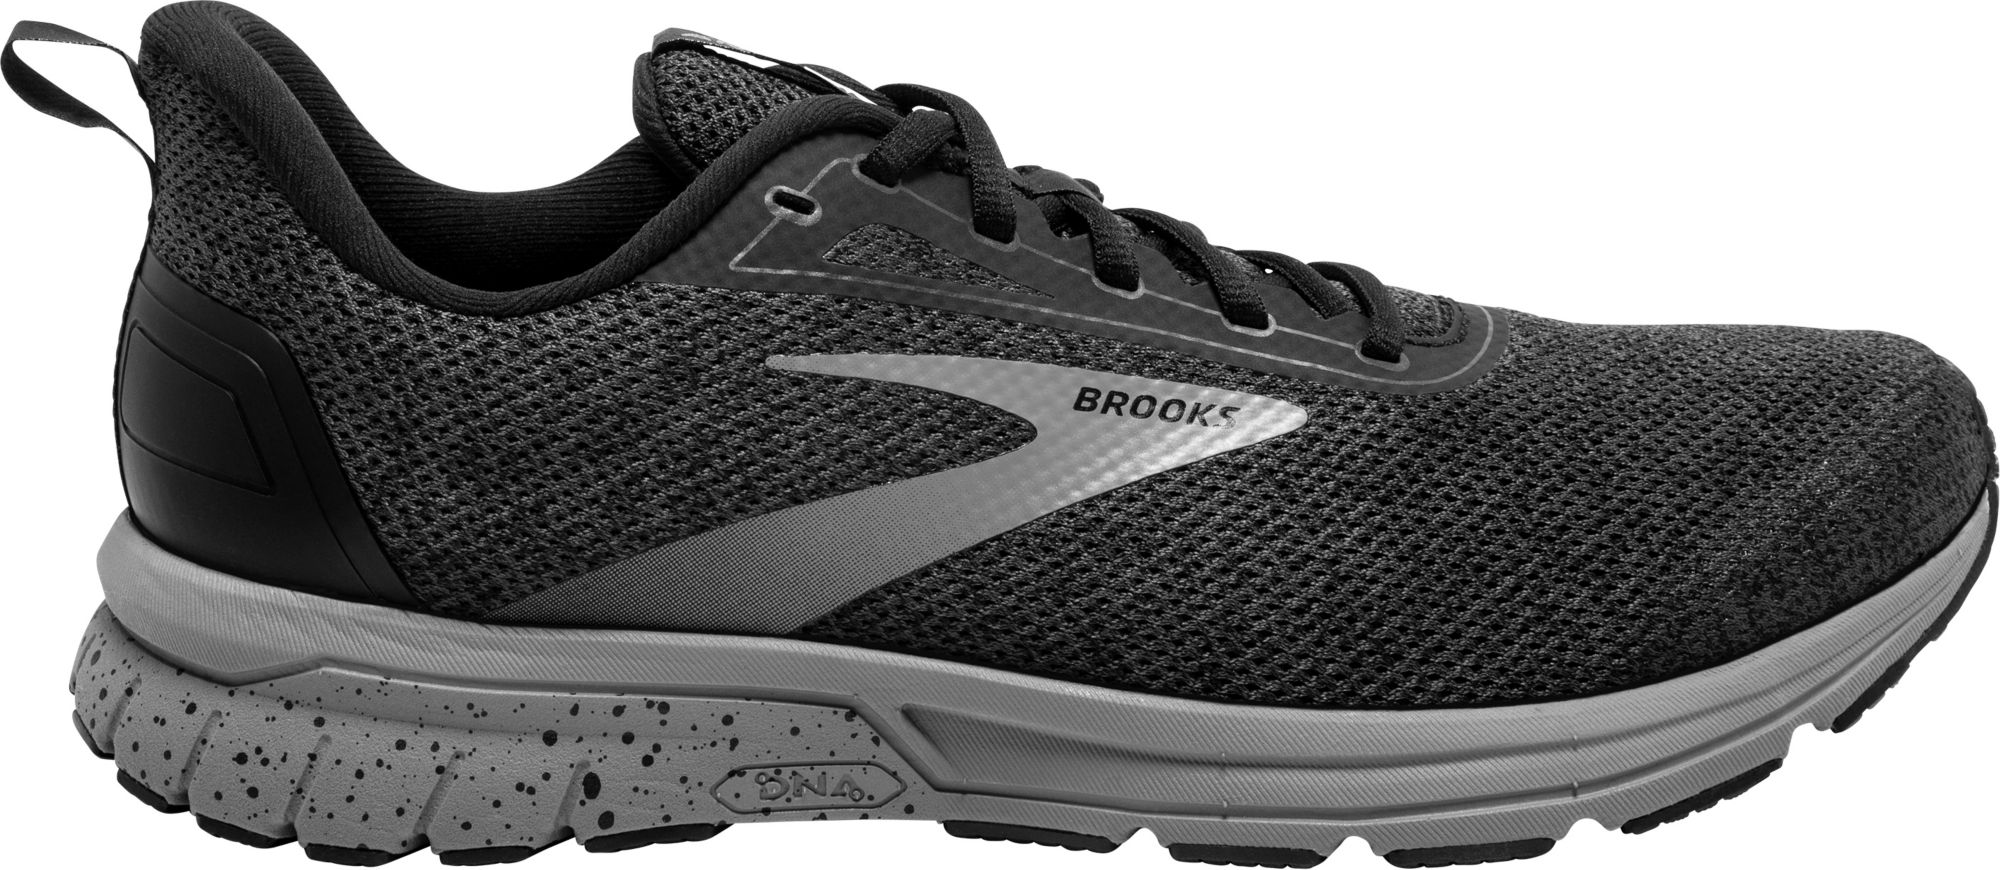 Running Shoes for Men | Best Price Guarantee at DICK'S